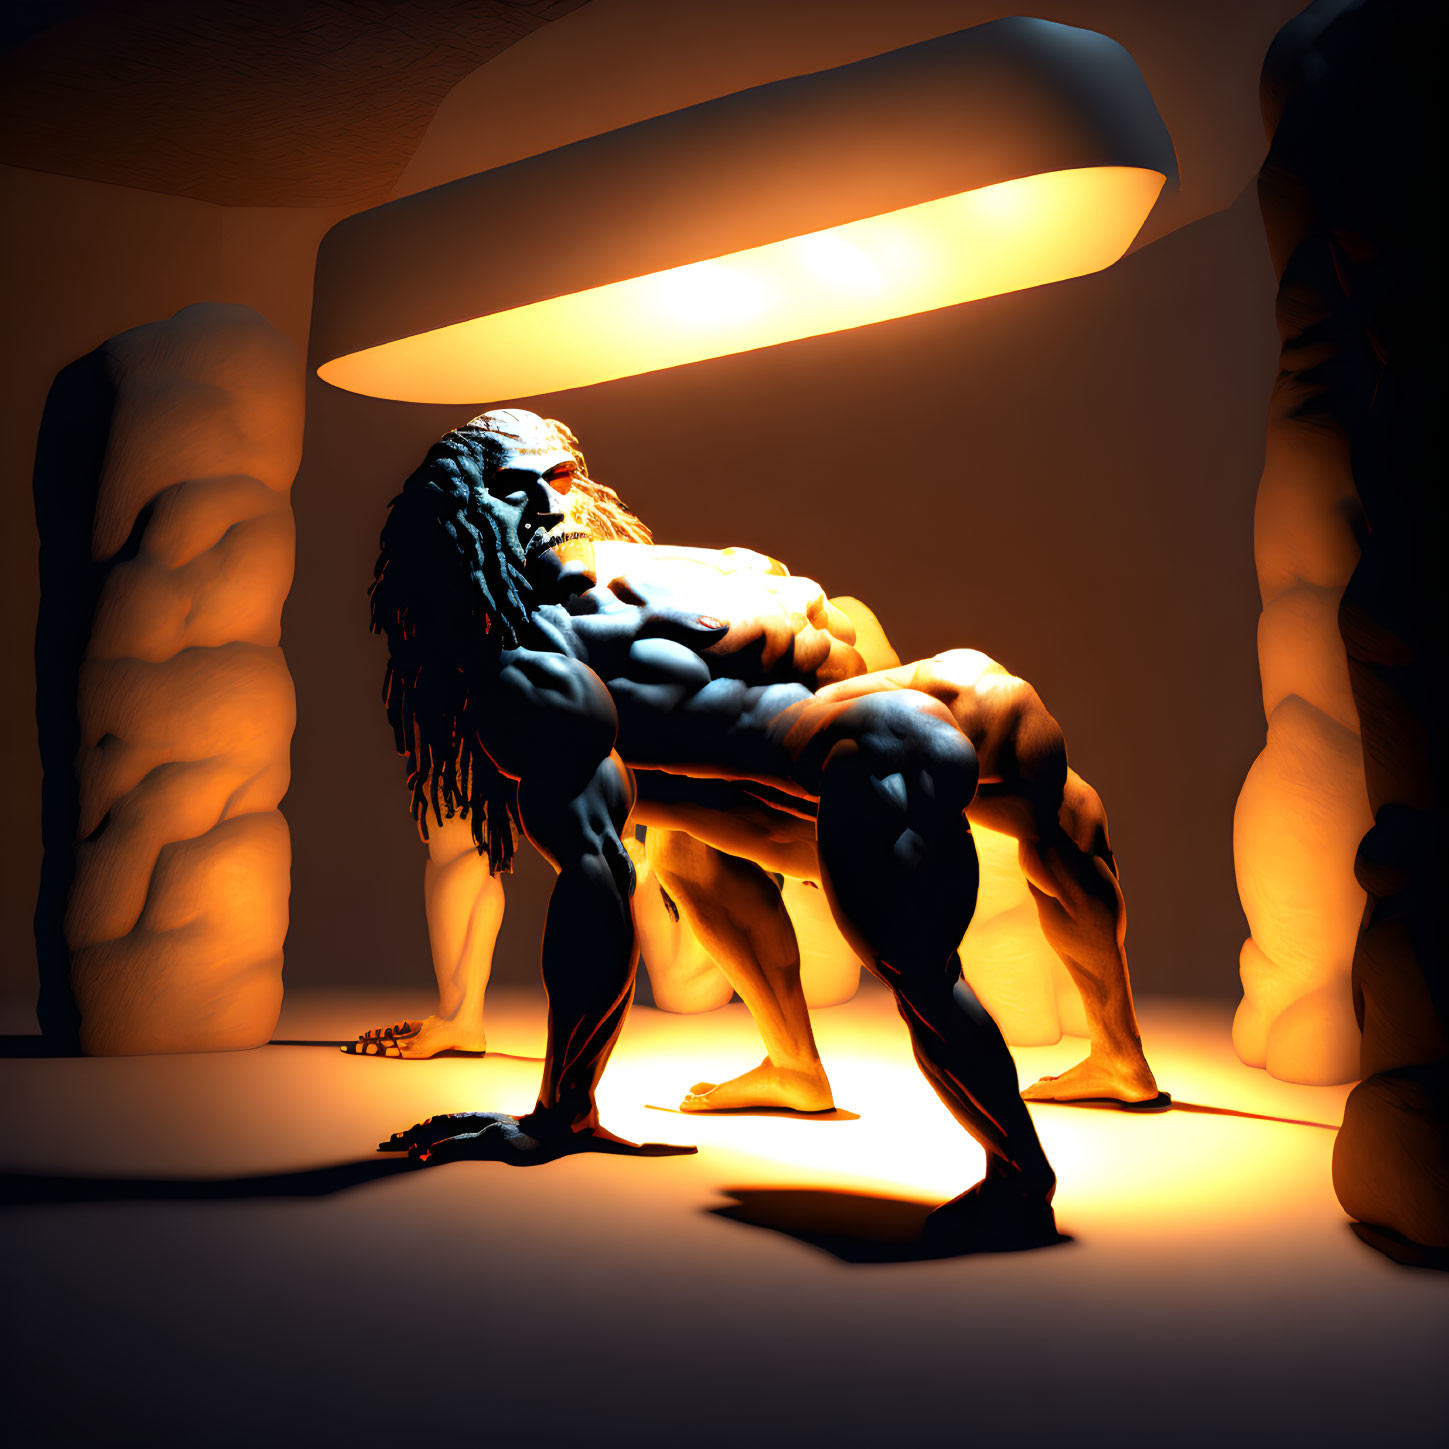 Muscular Figure Poses Dramatically in Warm Lighting with Abstract Shapes